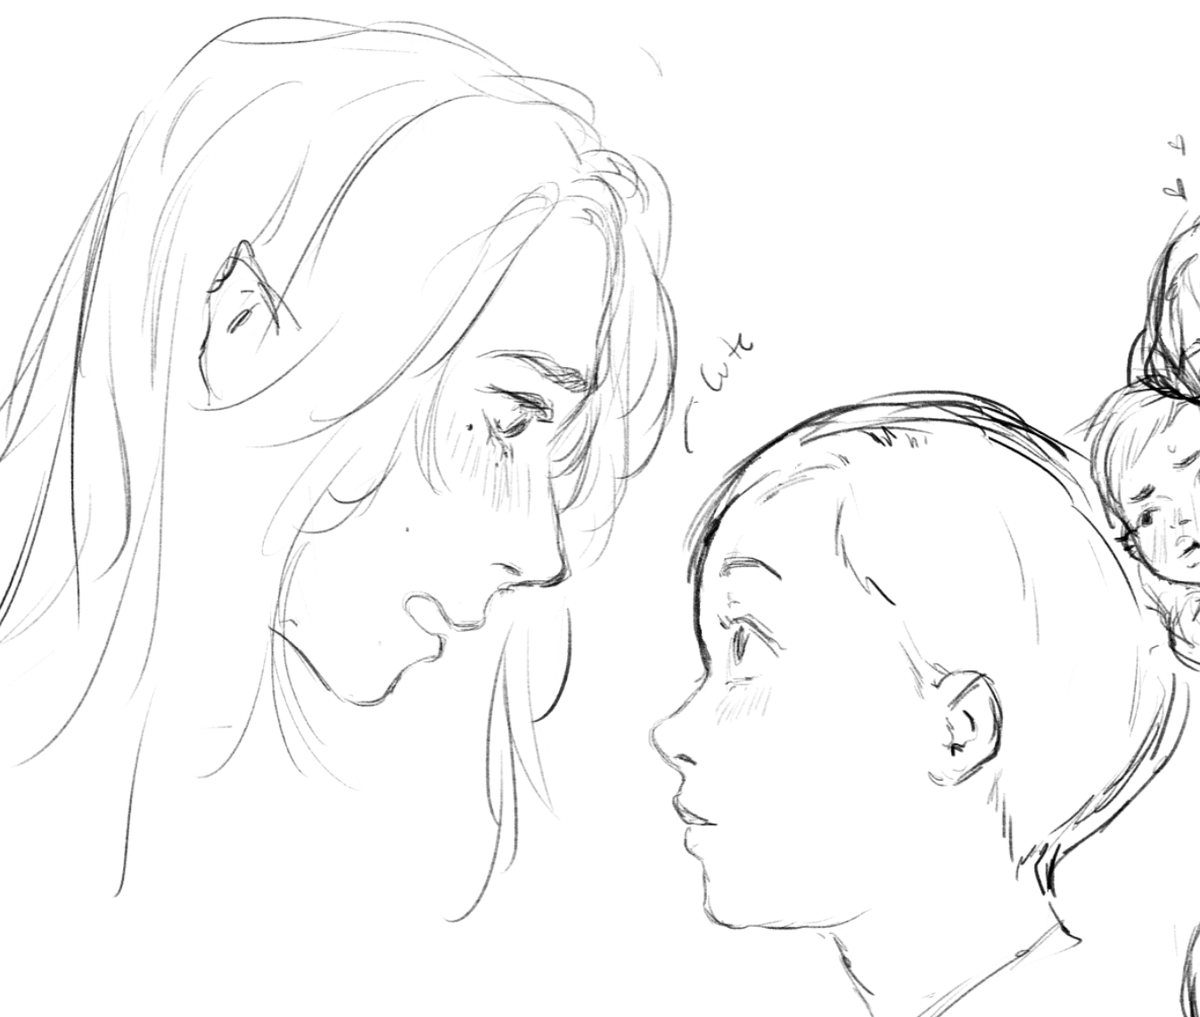 Doodles of ocs I don't draw enough, Dragon (long hair) and Human(?) GF (Short hair)

I've just realize neither of them even have names yet and they're a year old, Dragon's design isn't really finalized either, I need to fix these things 